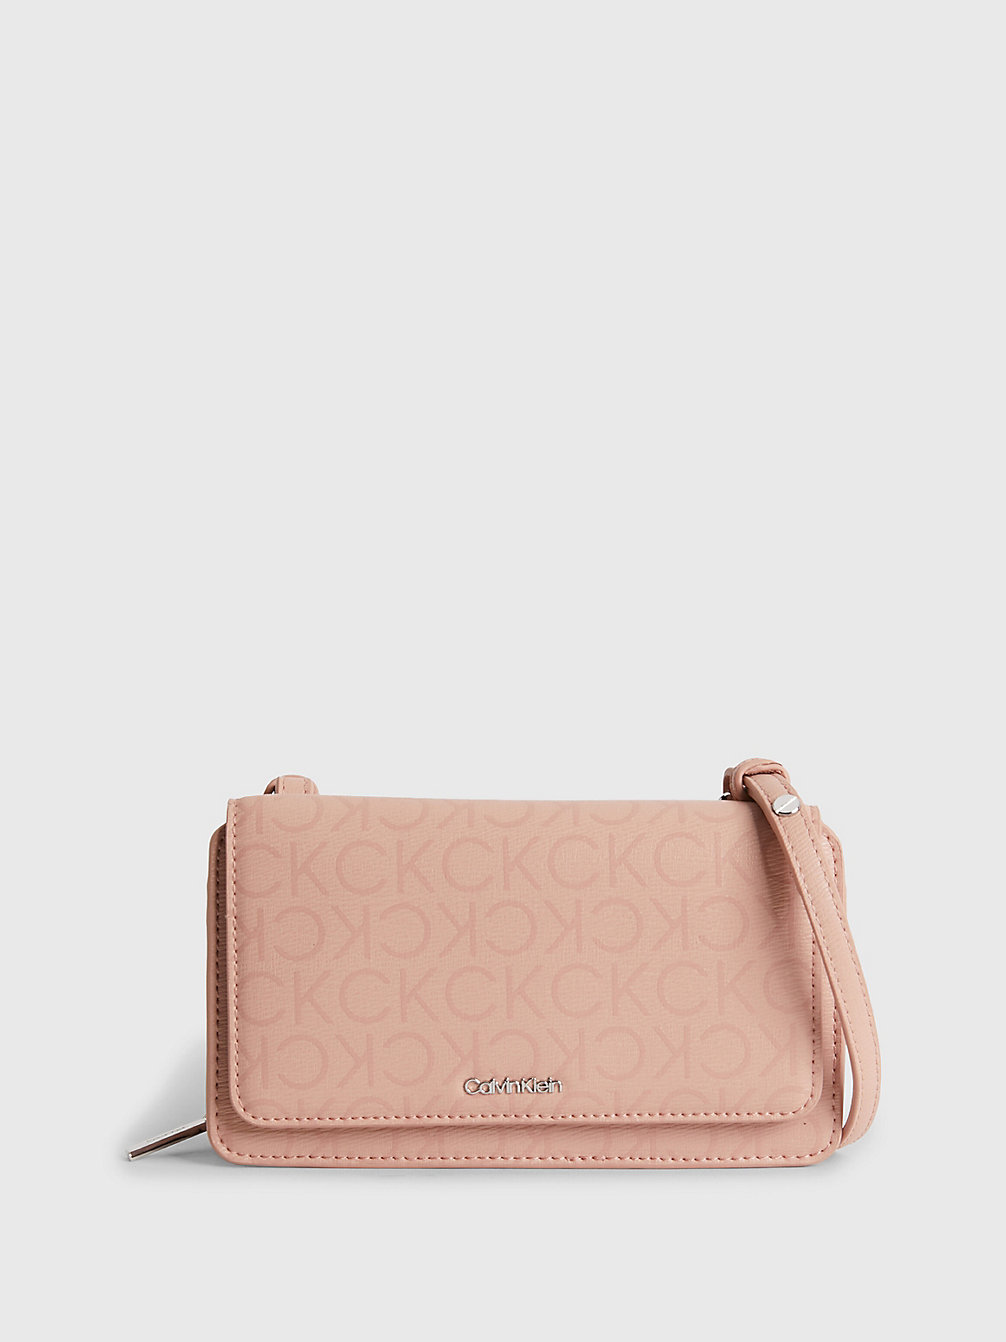 CAFE AU LAIT MONO Recycled Phone Wallet Bag undefined women Calvin Klein